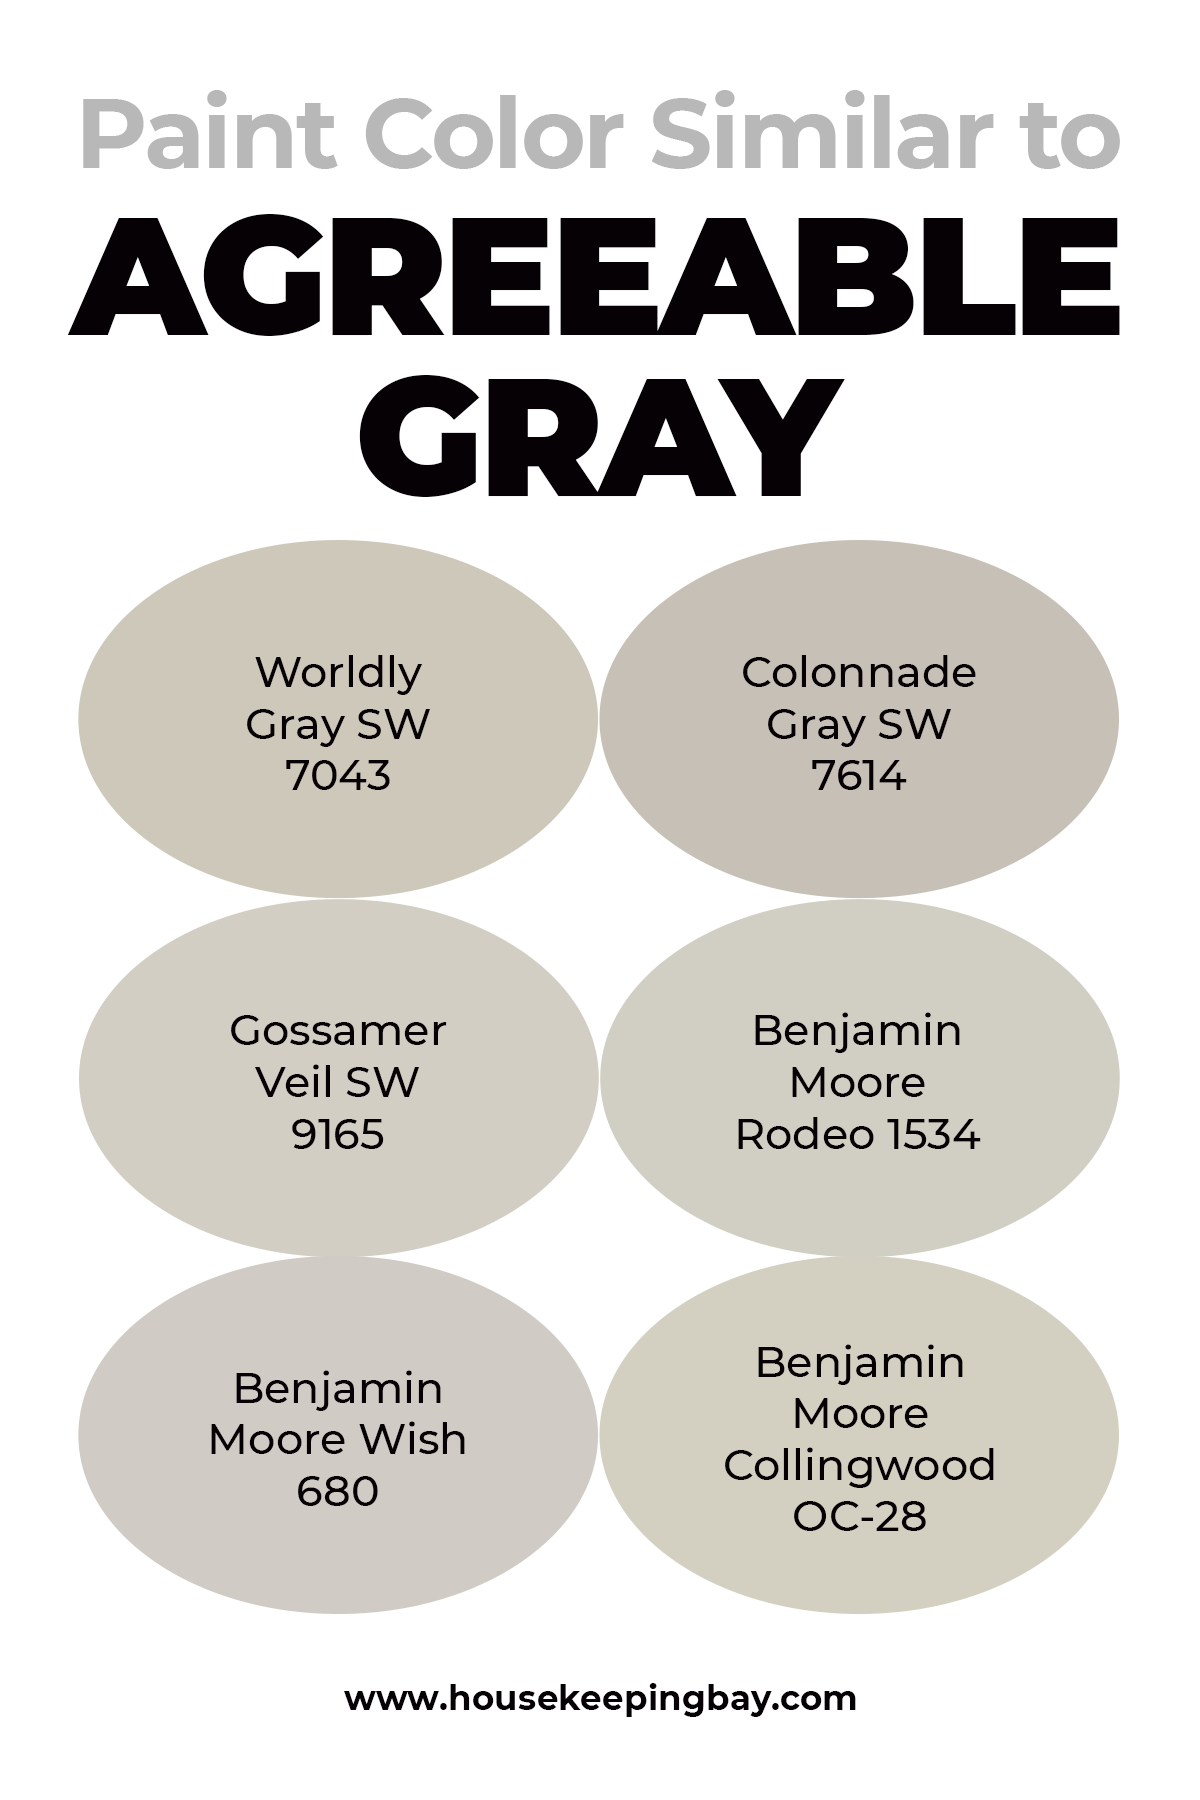 Paint Color Similar to Agreeable Gray